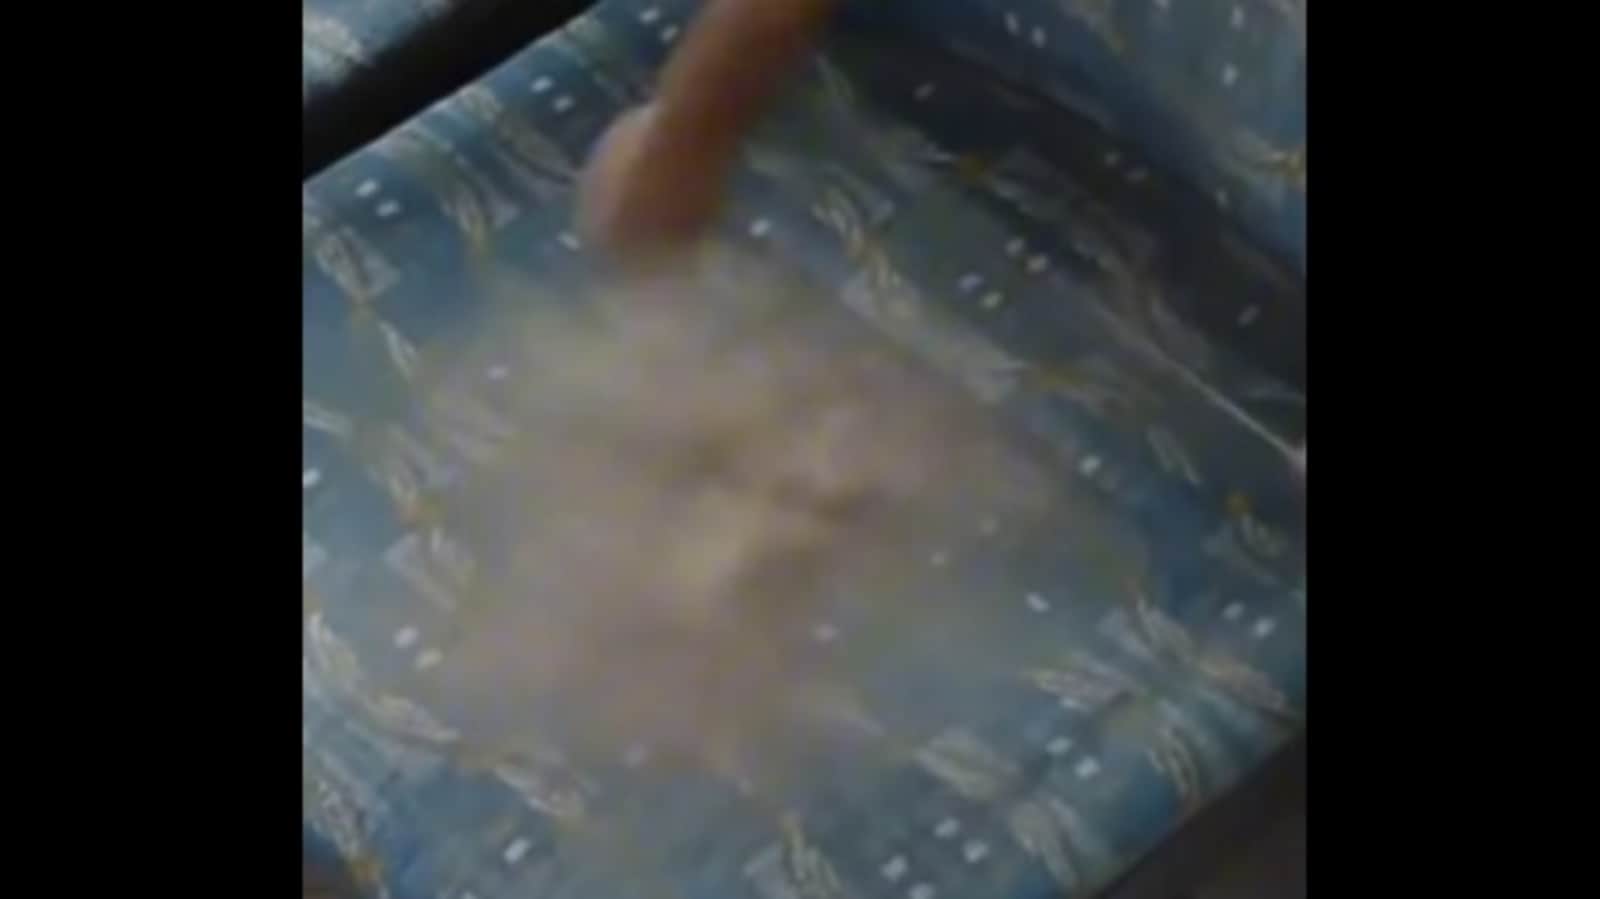 Dust collected in a bus seat leaves netizens horrified. Watch